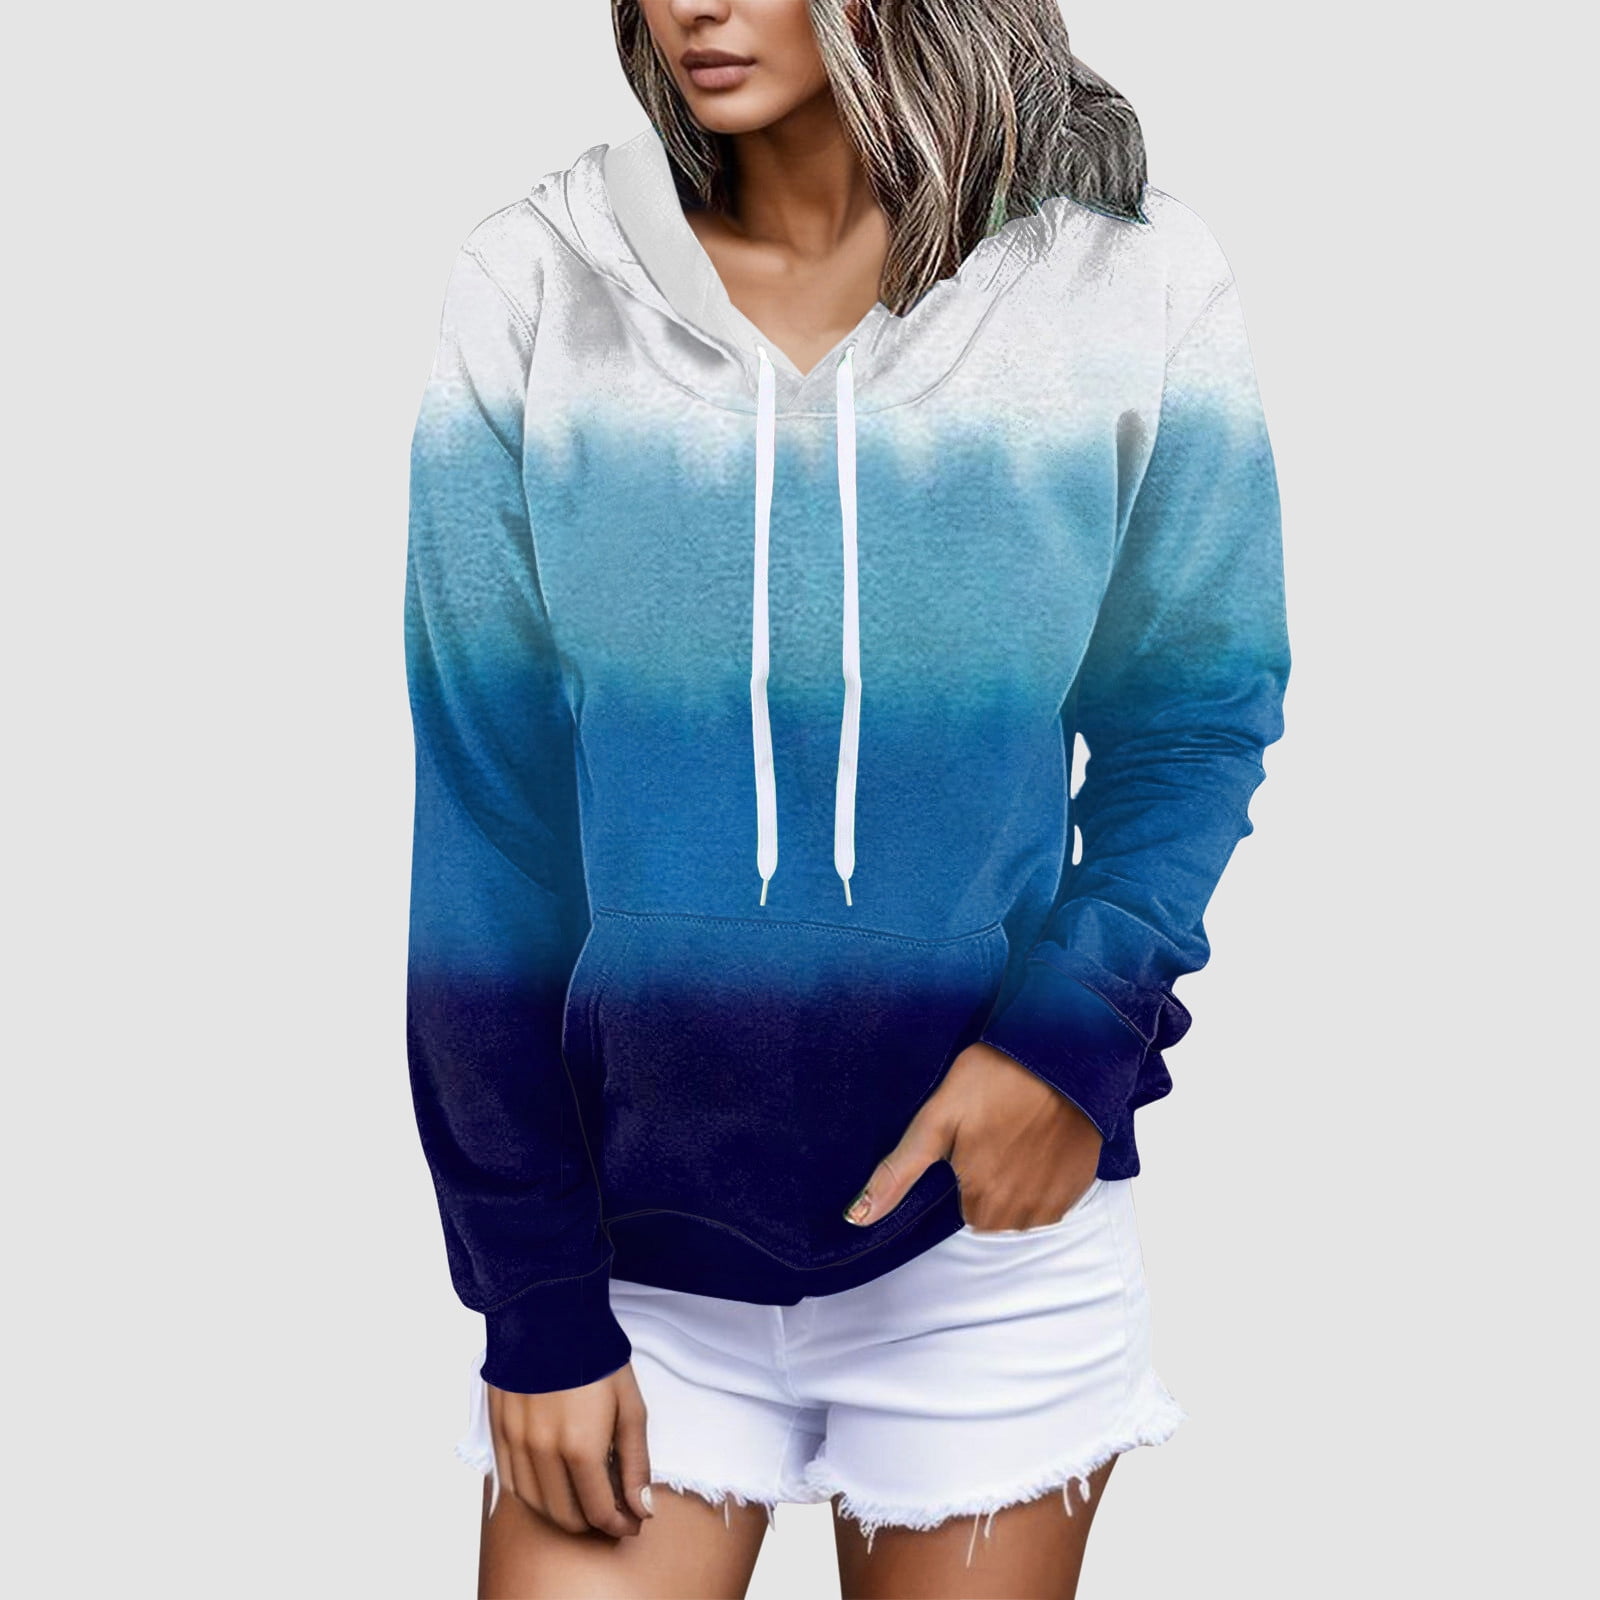 Pocket Blue Sweatshirt Casual Loose Women\' s Sweatshirts Hoodie M Solid Tie Tops Ombre with Sleeve Long Dye Color Pullover Lmtime Blouse